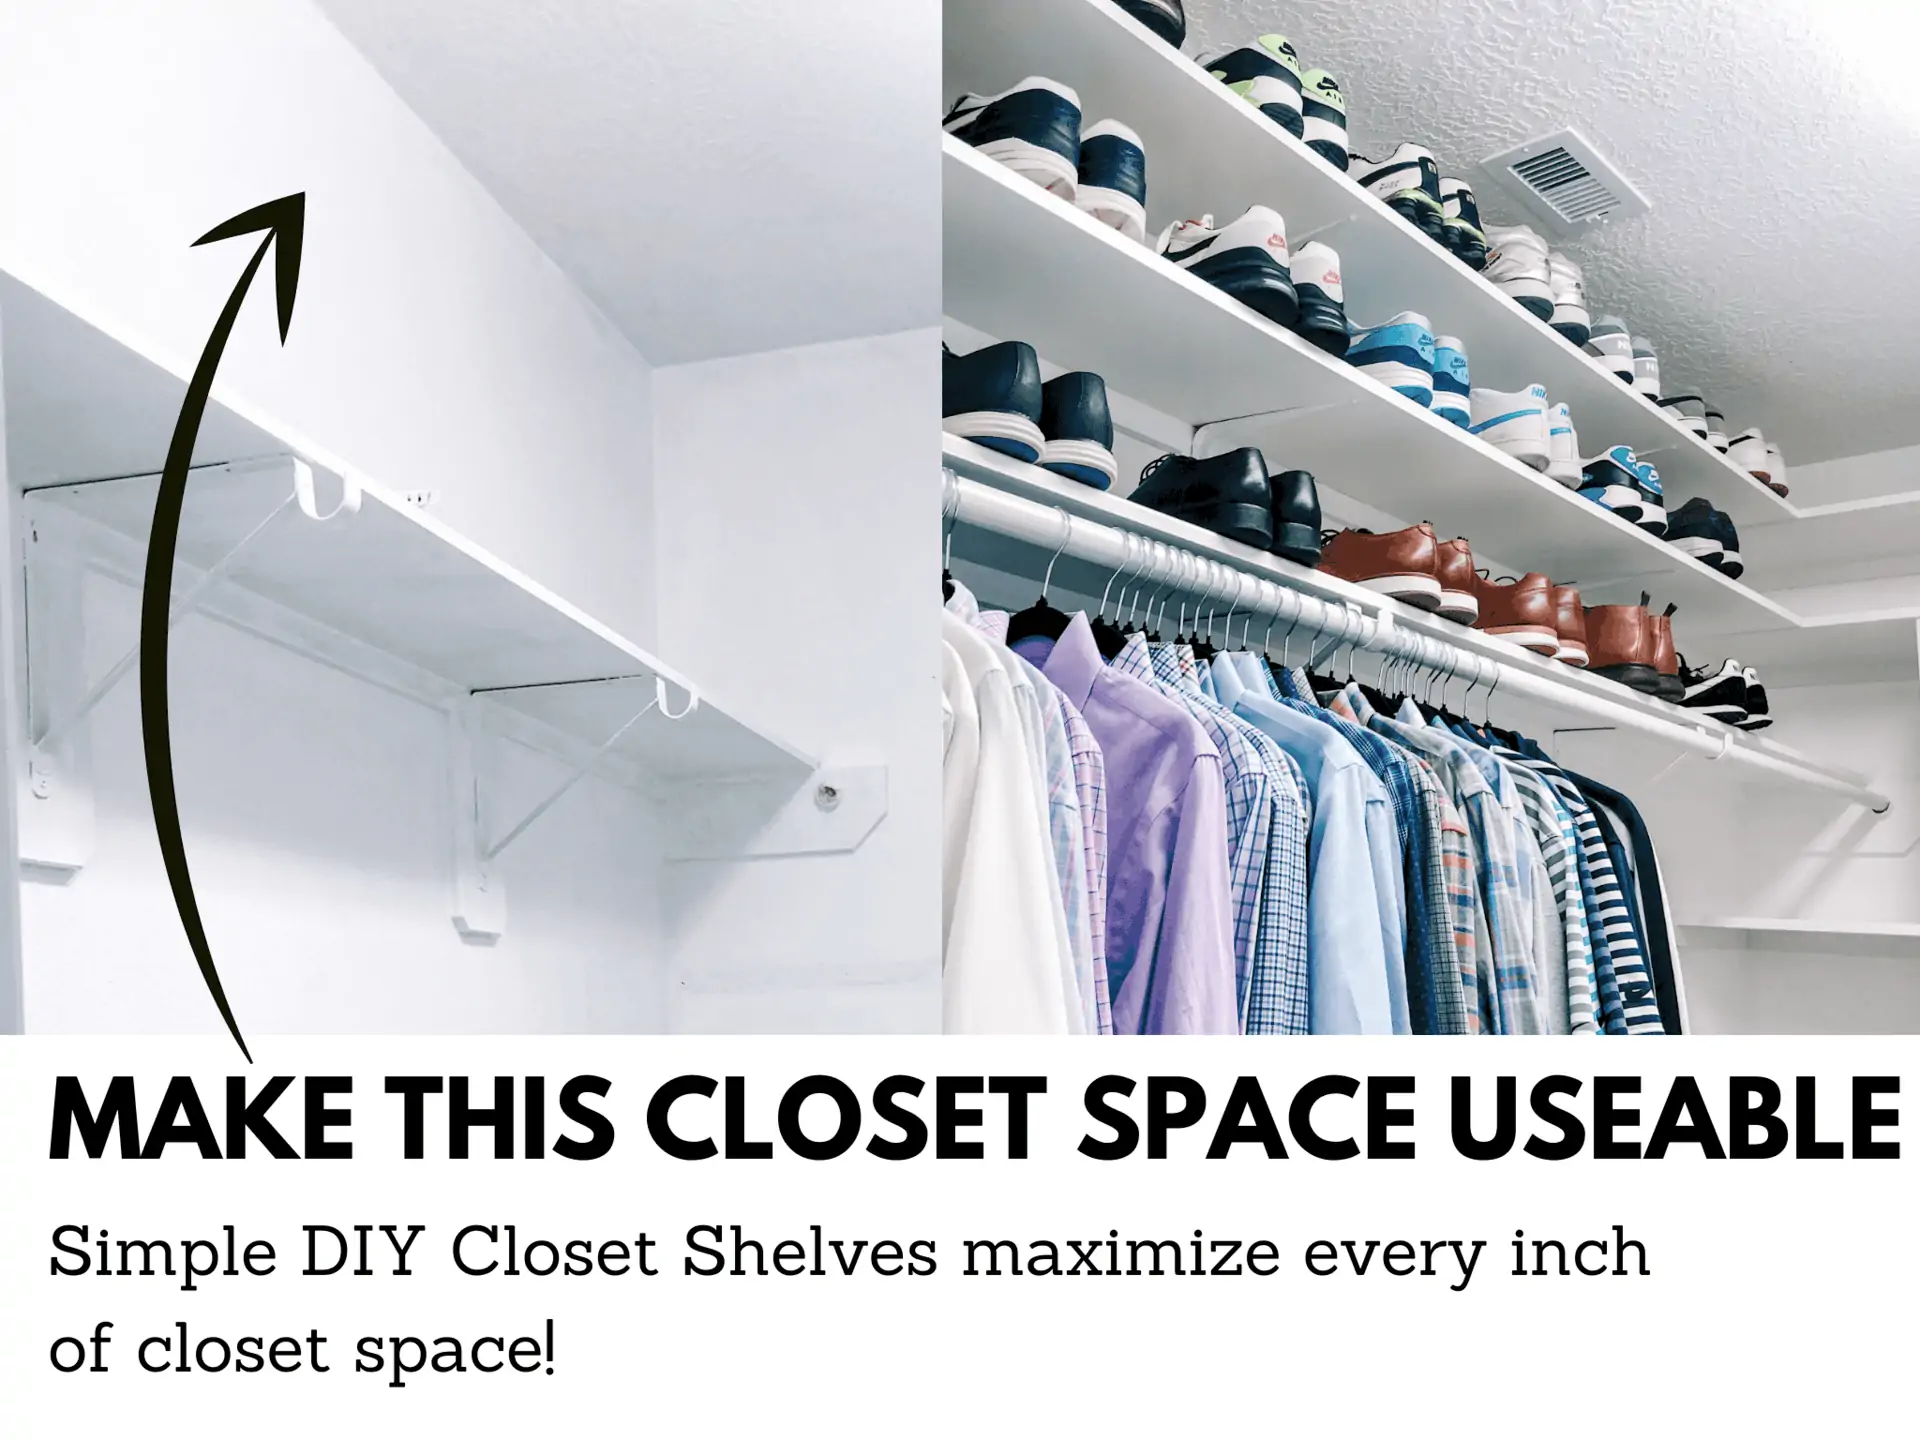 Simple DIY Closet Shelves installed to make unused closet space near ceiling useable for shoe organization